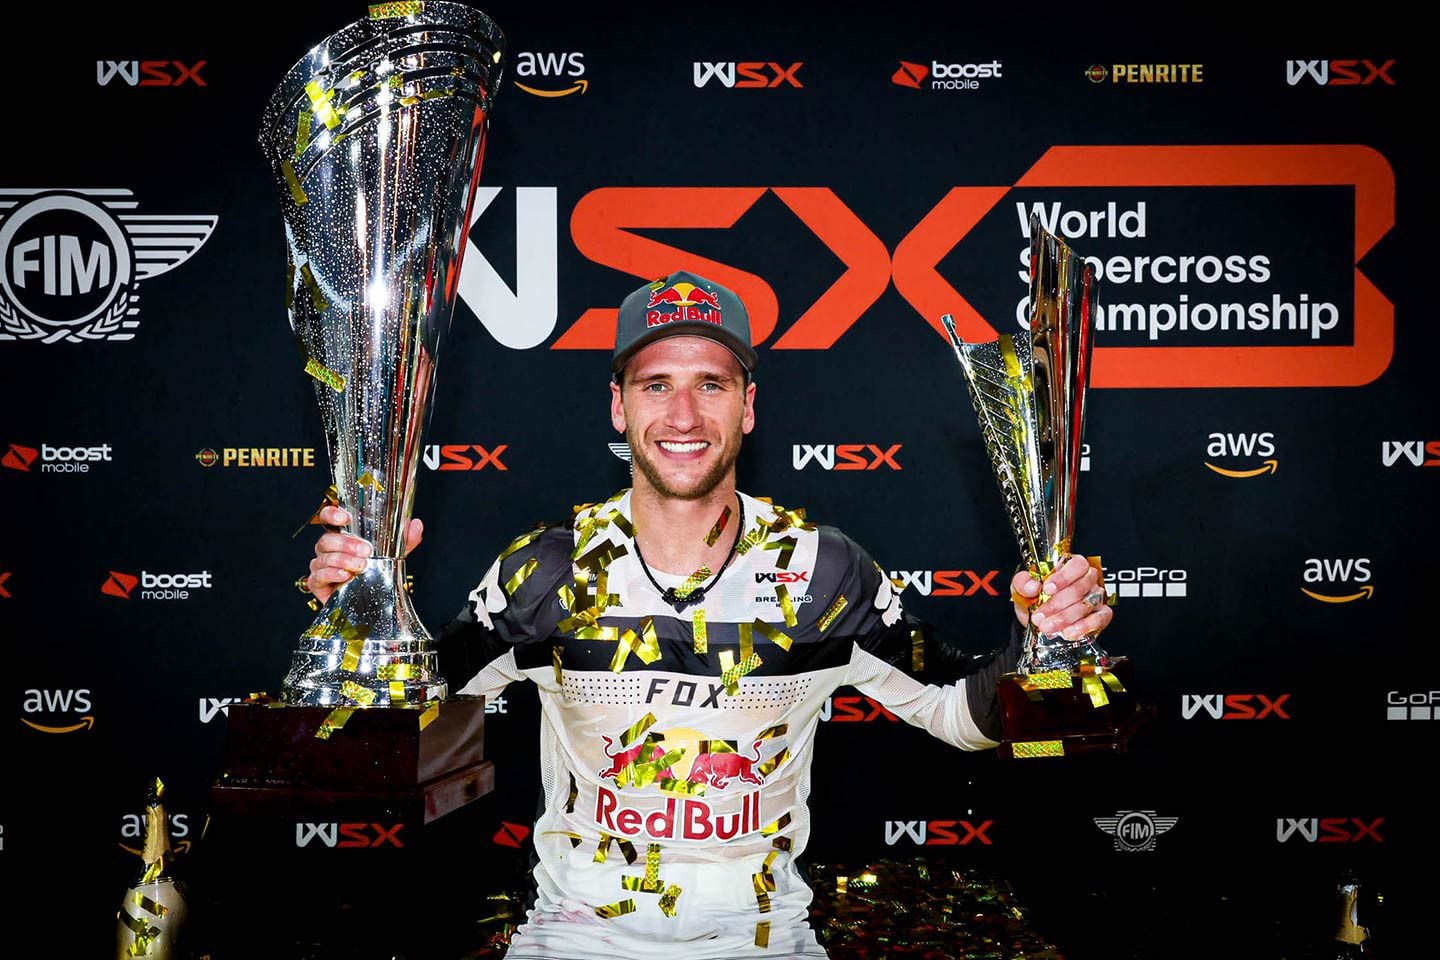 Ken Roczen has set his sights on FIM World Supercross for 2023, 2024, and 2025.